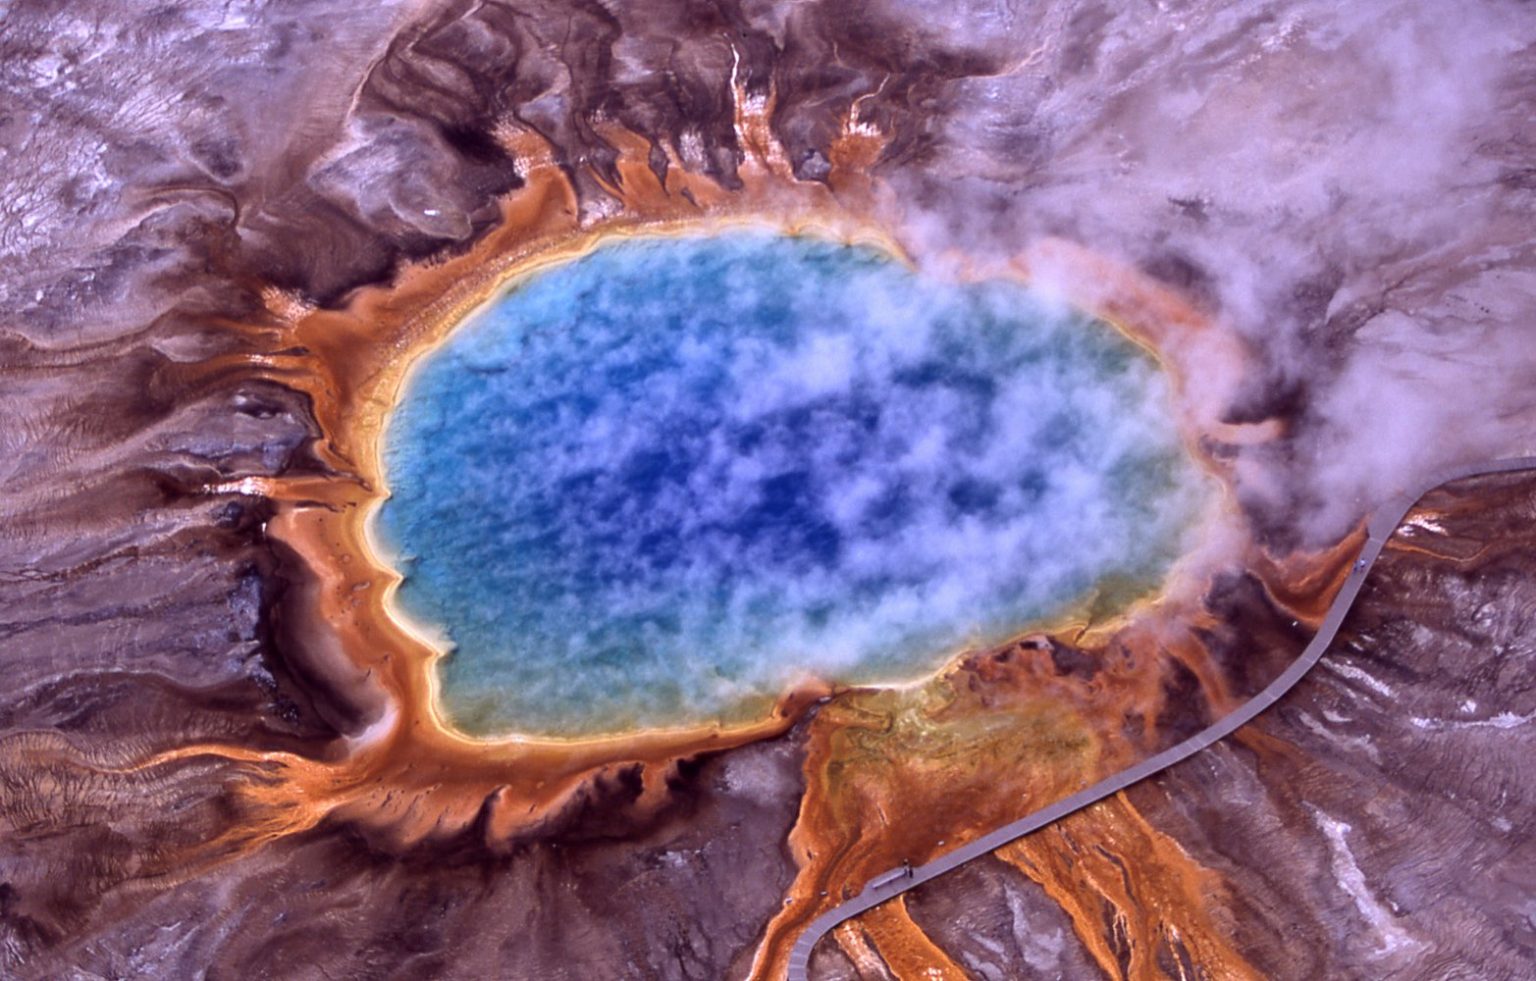 43 earthquakes hit Yellowstone volcano amid fears of impending super